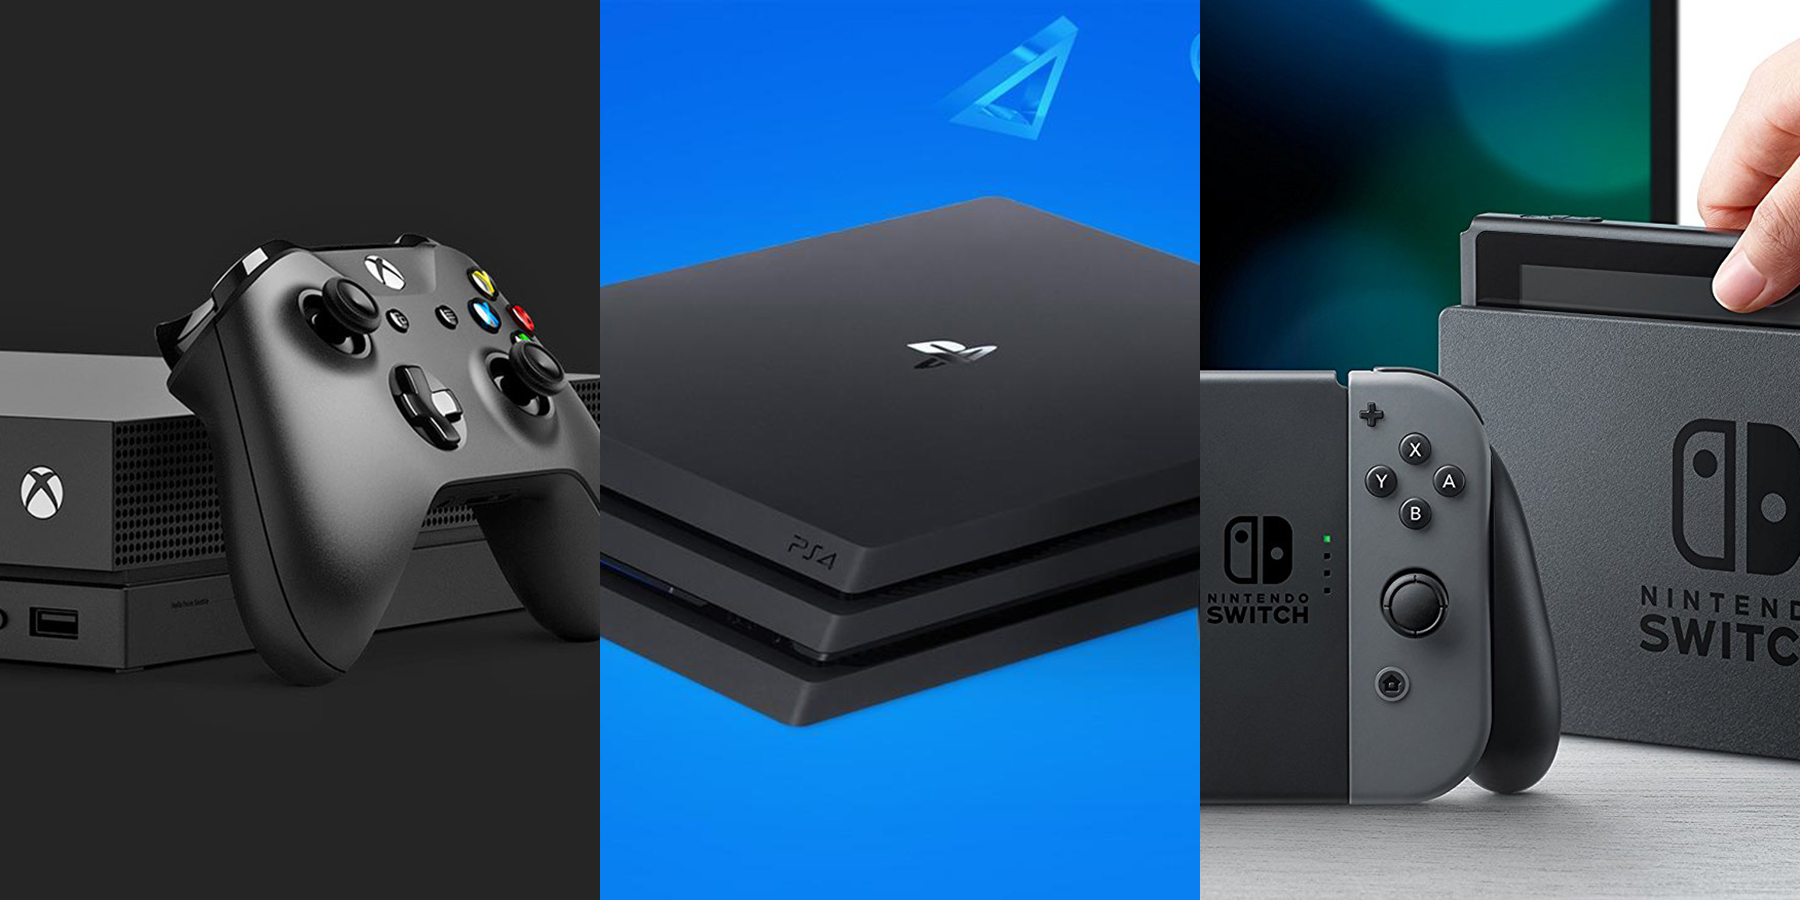 Which Console Has the Best 2018 Lineup? – HD Report